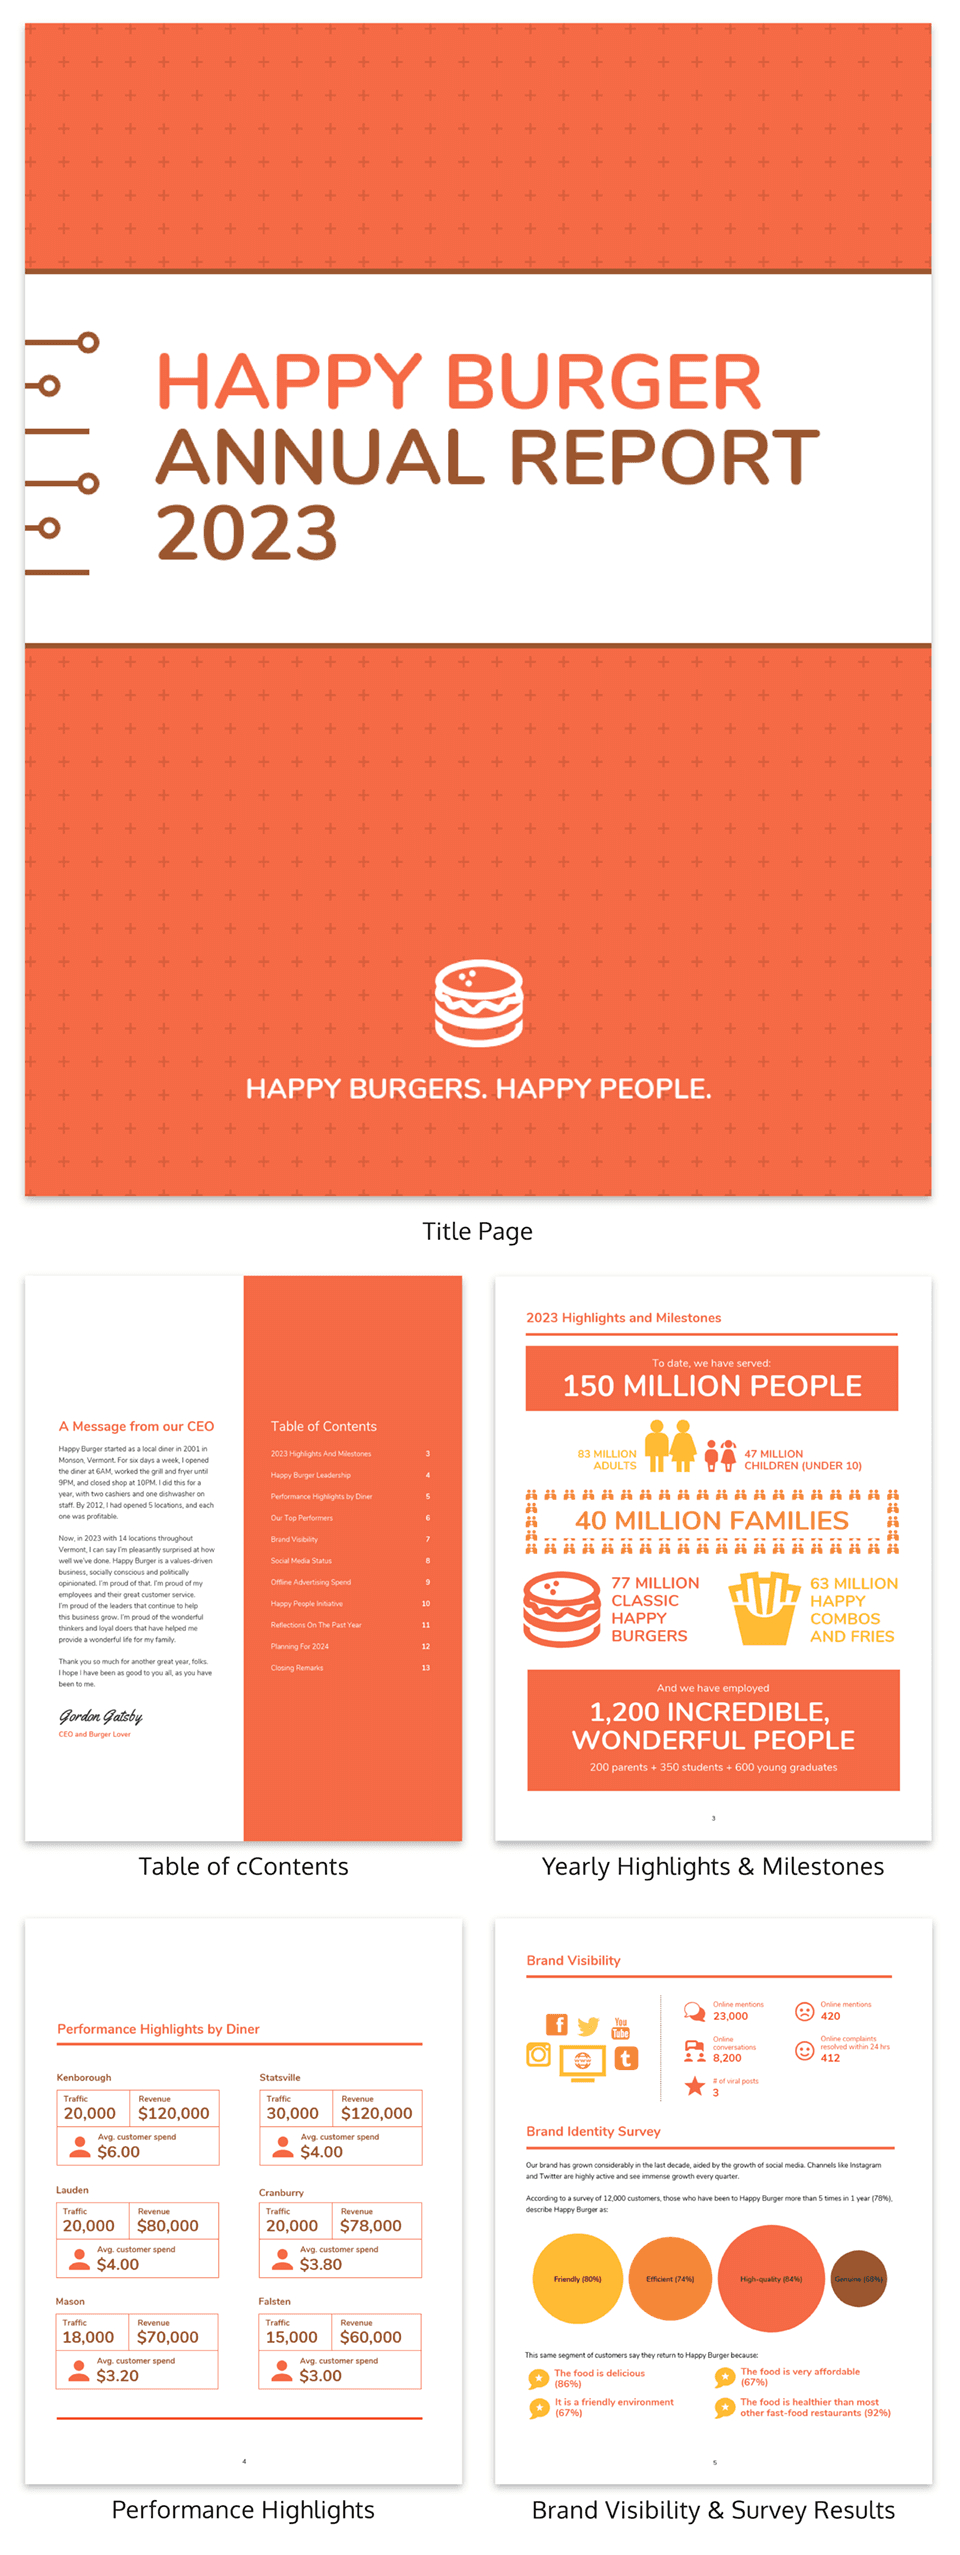 55+ Customizable Annual Report Design Templates, Examples & Tips Within Hr Annual Report Template